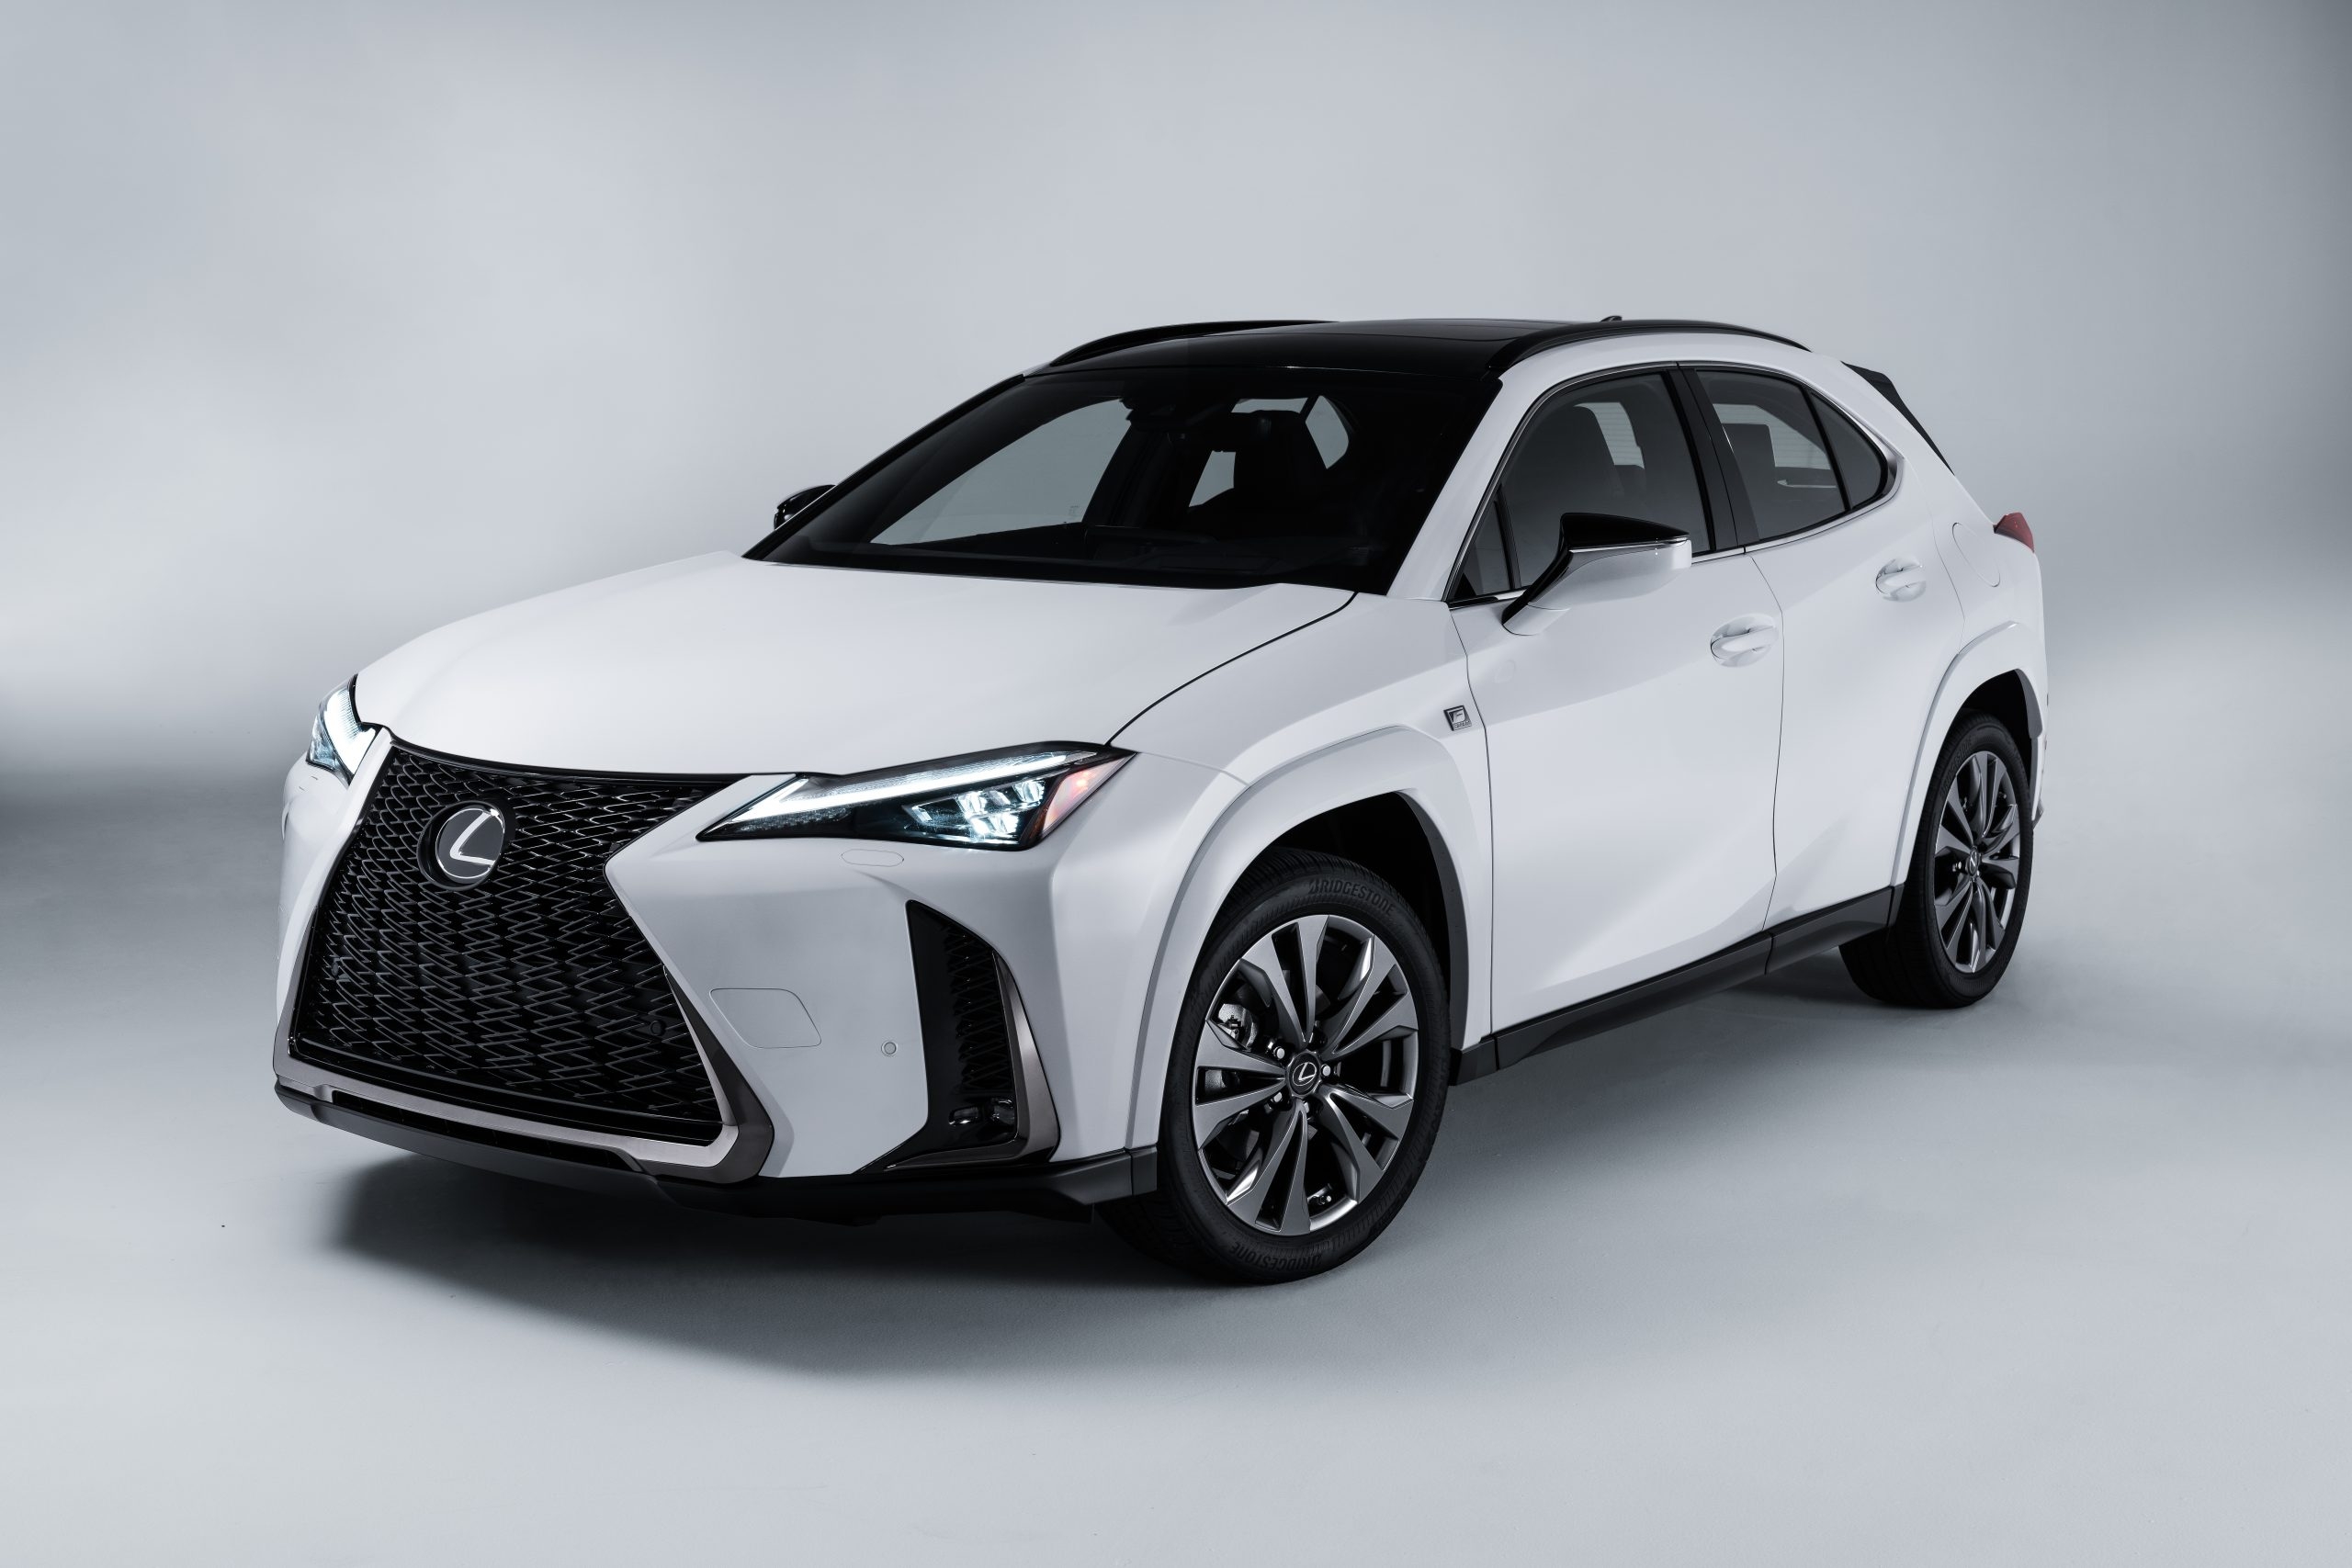 Refreshed Lexus UX Revealed; Only Offered as Hybrid in US